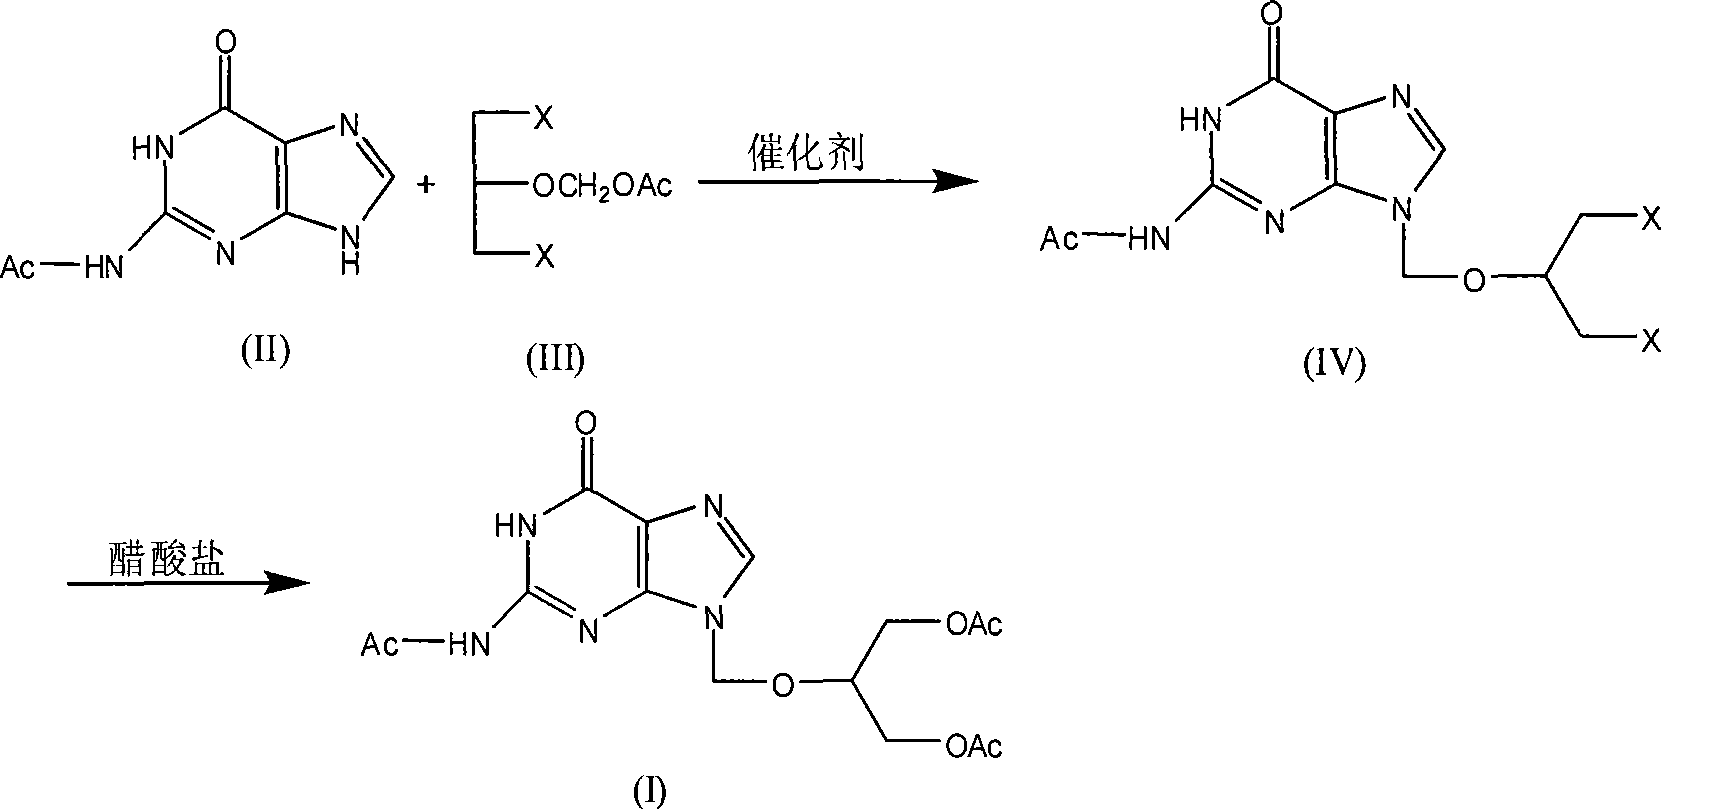 Chemical synthesis of triacetylganciclovir